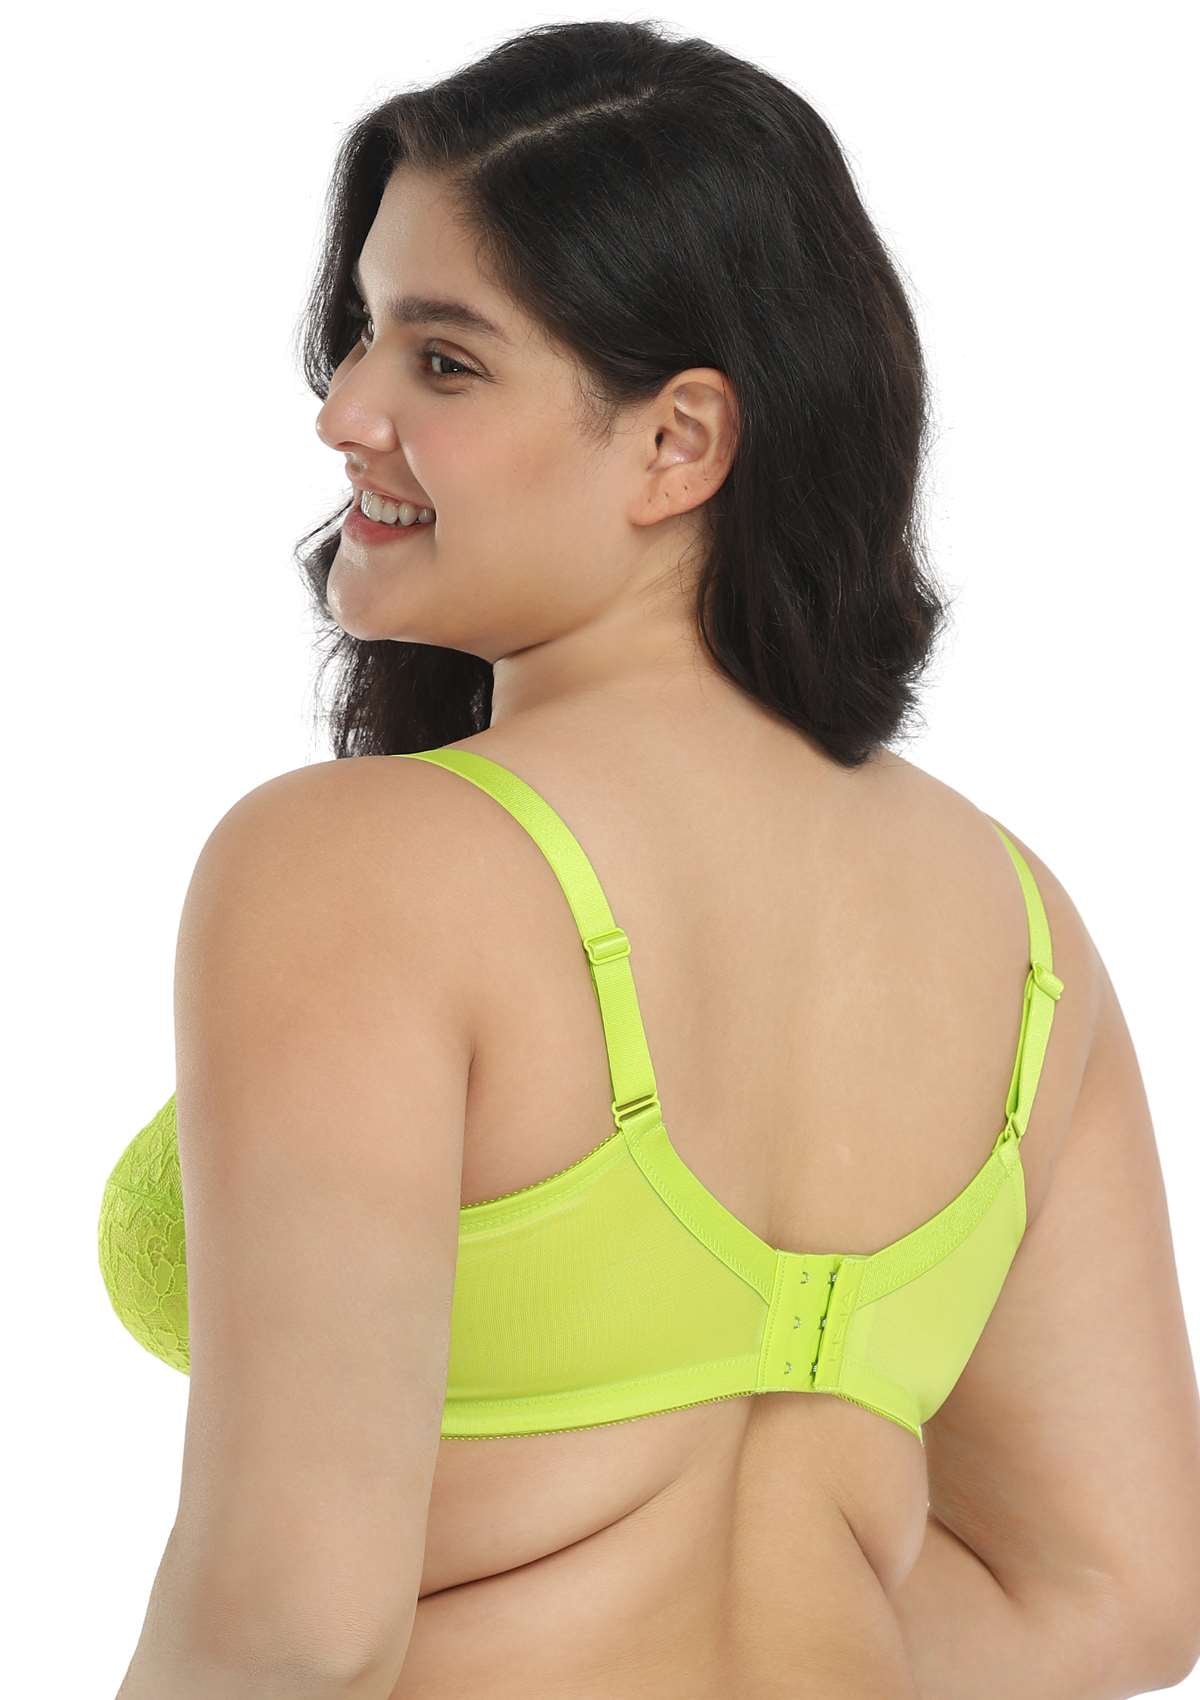 HSIA Enchante Full Cup Minimizing Bra: Supportive Unlined Lace Bra - Lime Green / 36 / H